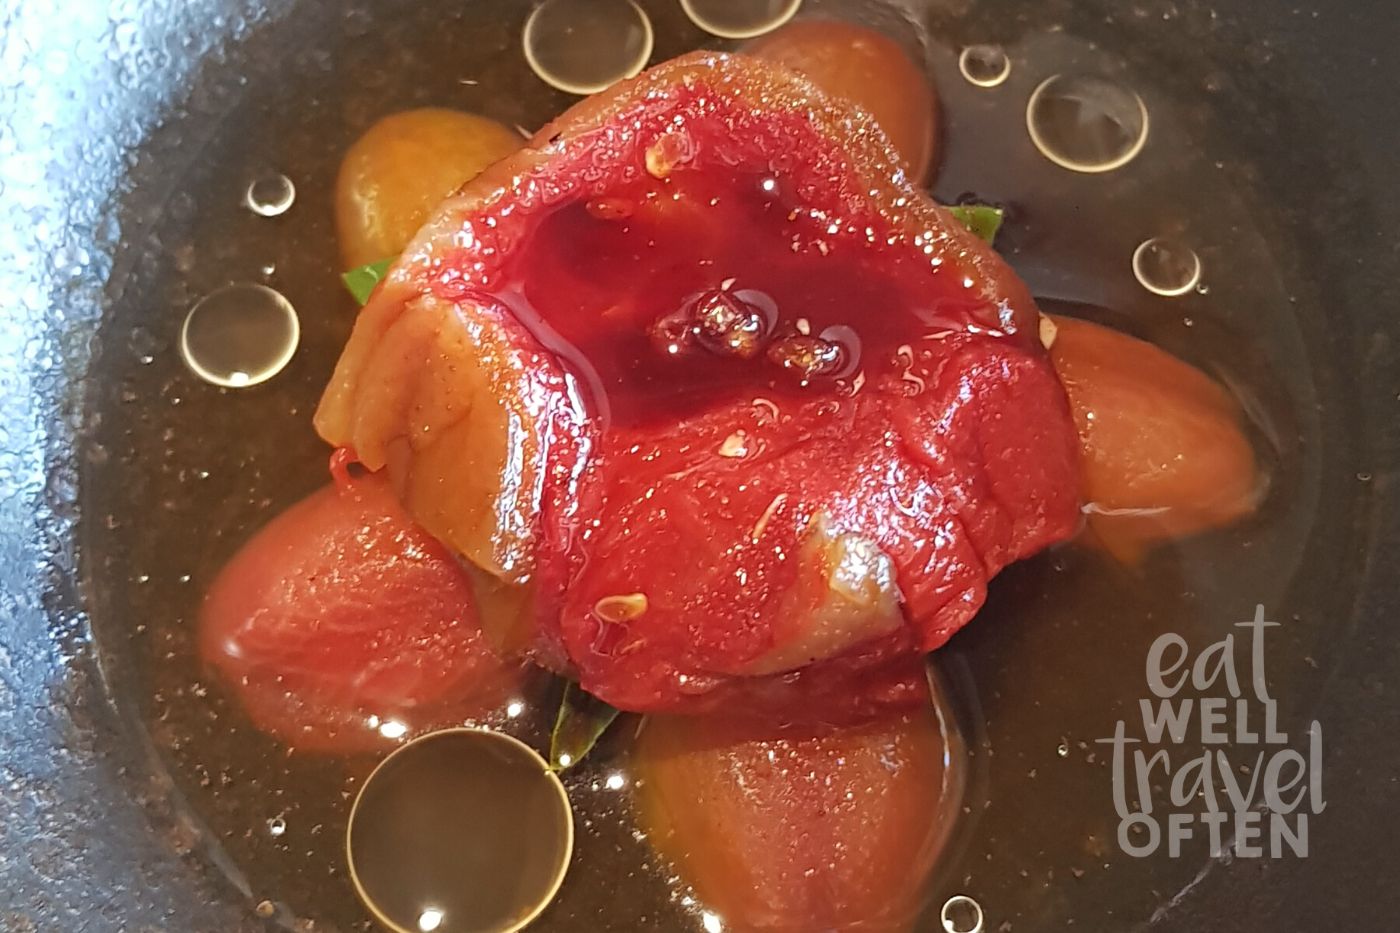 Watermelon that looks like a juicy bbq steak served in a bowl of broth